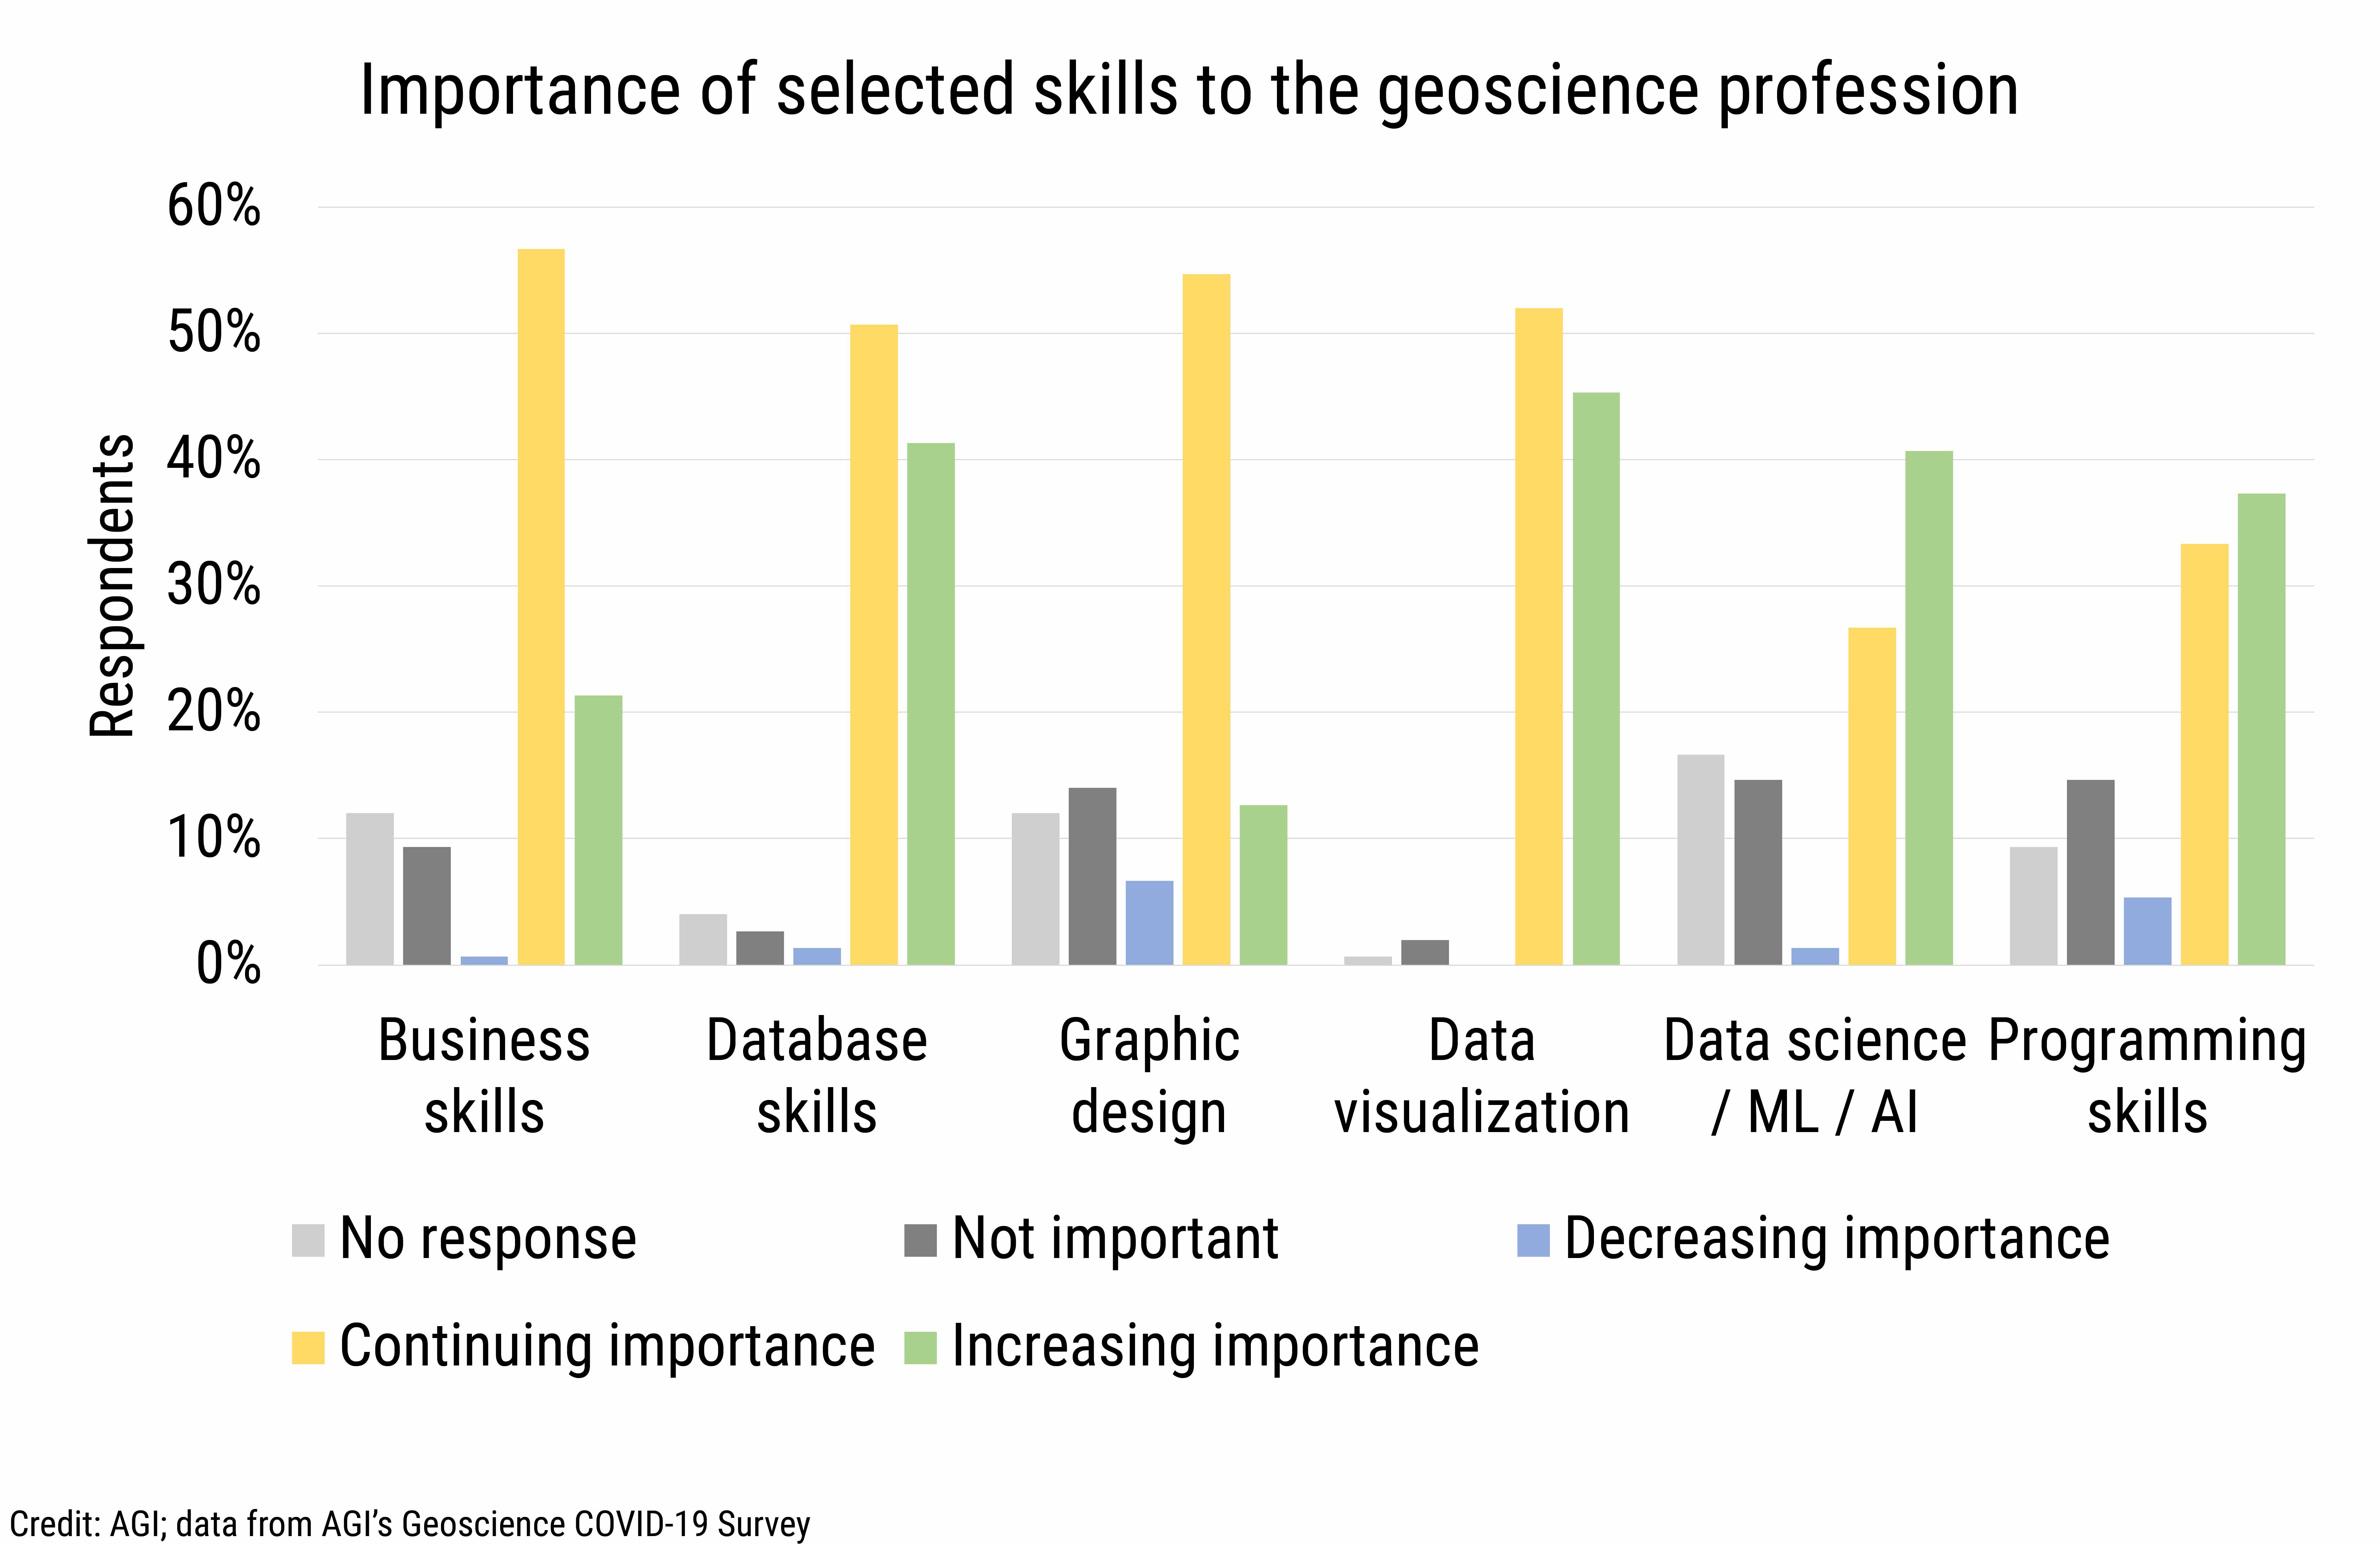 DB_2021-009 chart 02: Importance of selected skills to the geoscience profession (Credit: AGI; data from AGI&#039;s Geoscience COVID-19 Survey)